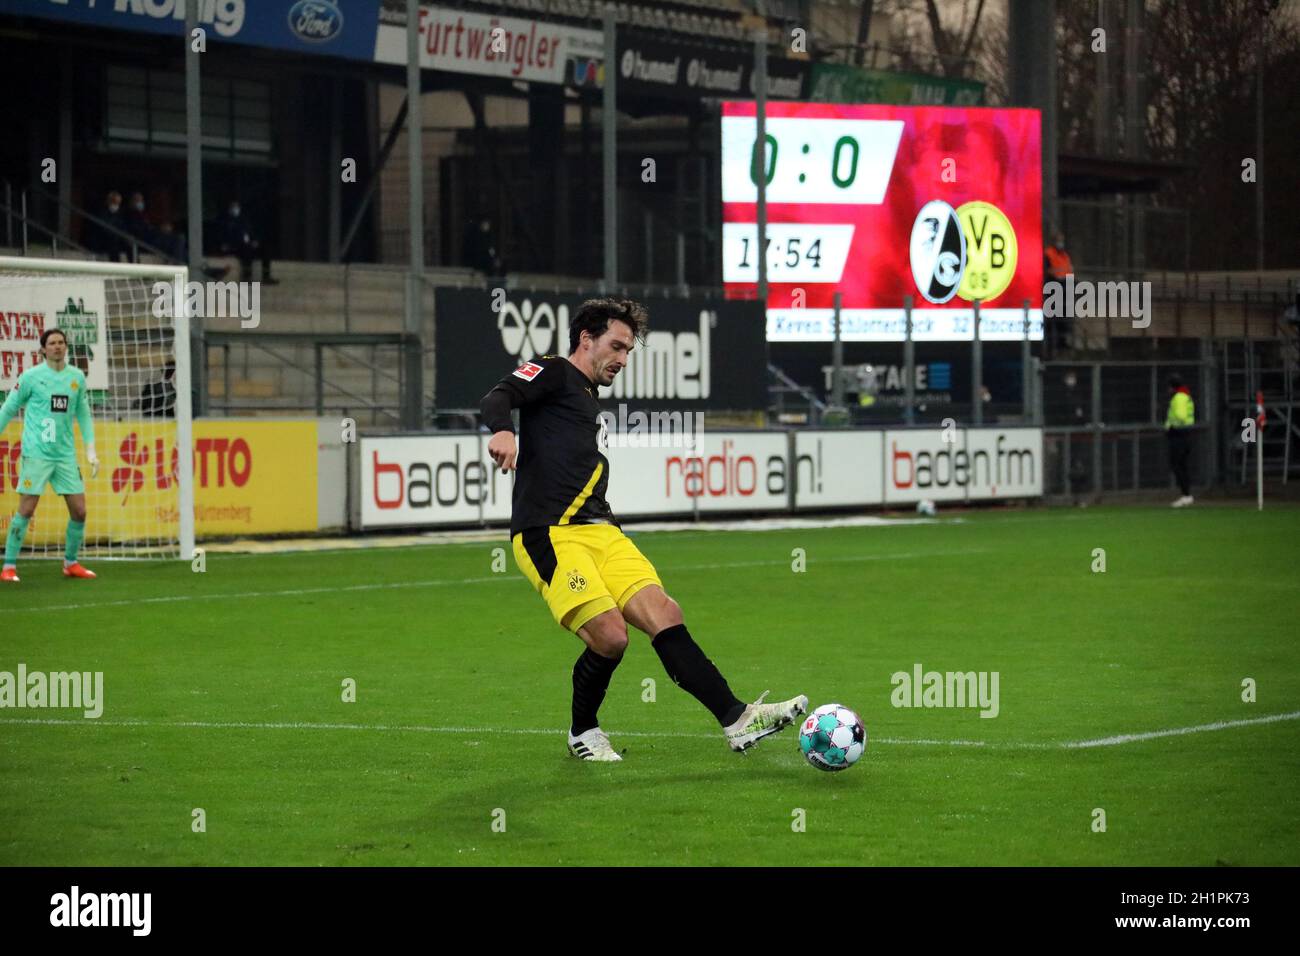 Page 2 - Mats Hummels Bvb Borussia Dortmund High Resolution Stock  Photography and Images - Alamy